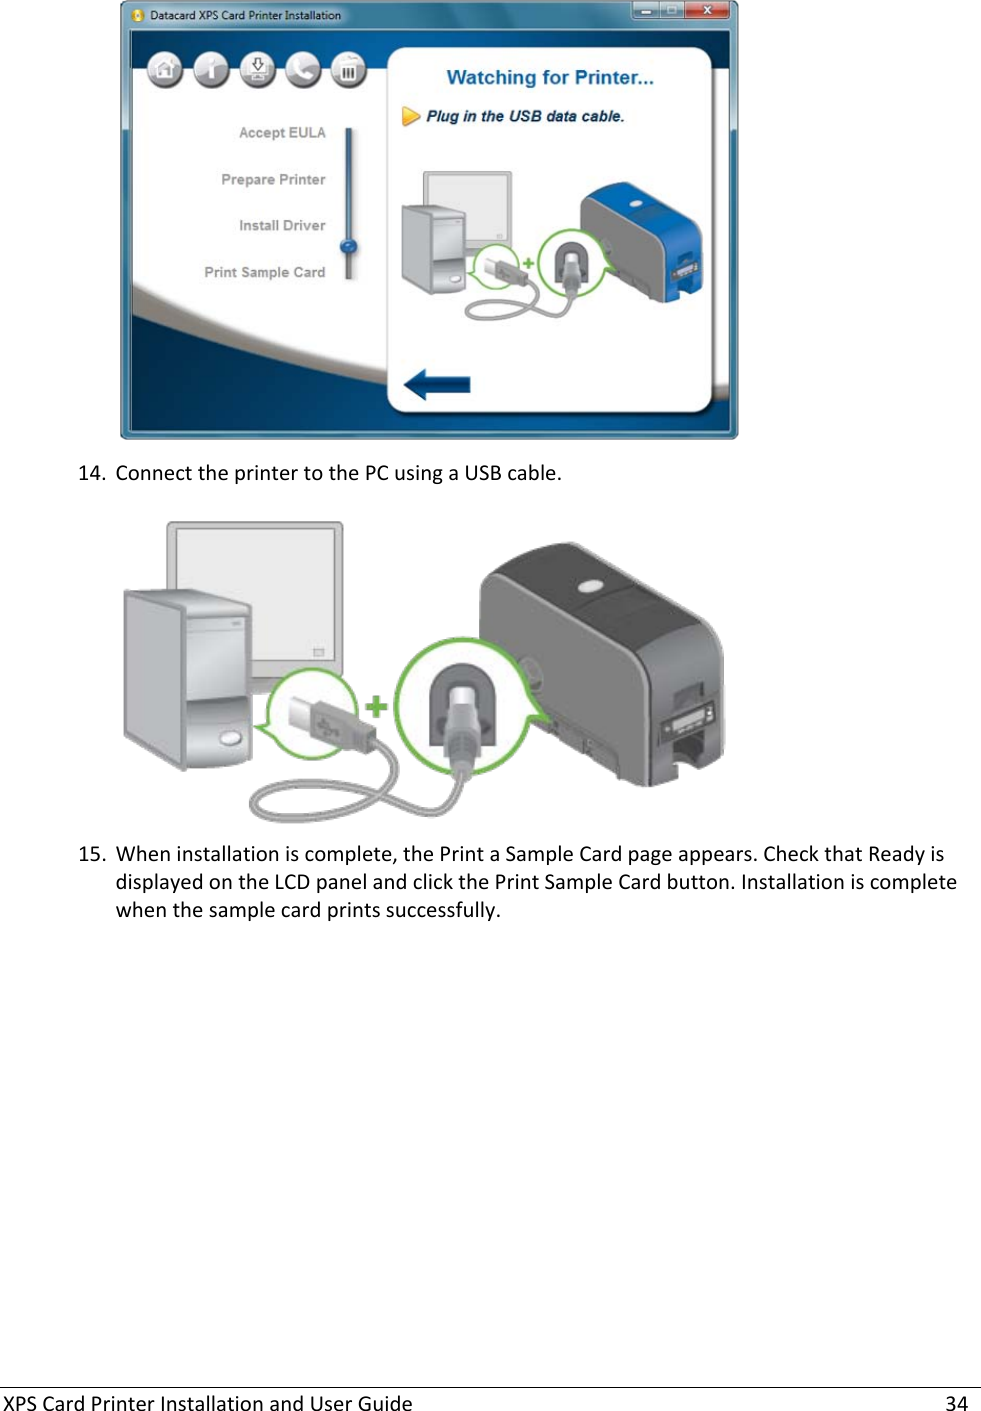 XPS Card Printer Installation and User Guide    34  14. Connect the printer to the PC using a USB cable.    15. When installation is complete, the Print a Sample Card page appears. Check that Ready is displayed on the LCD panel and click the Print Sample Card button. Installation is complete when the sample card prints successfully.  